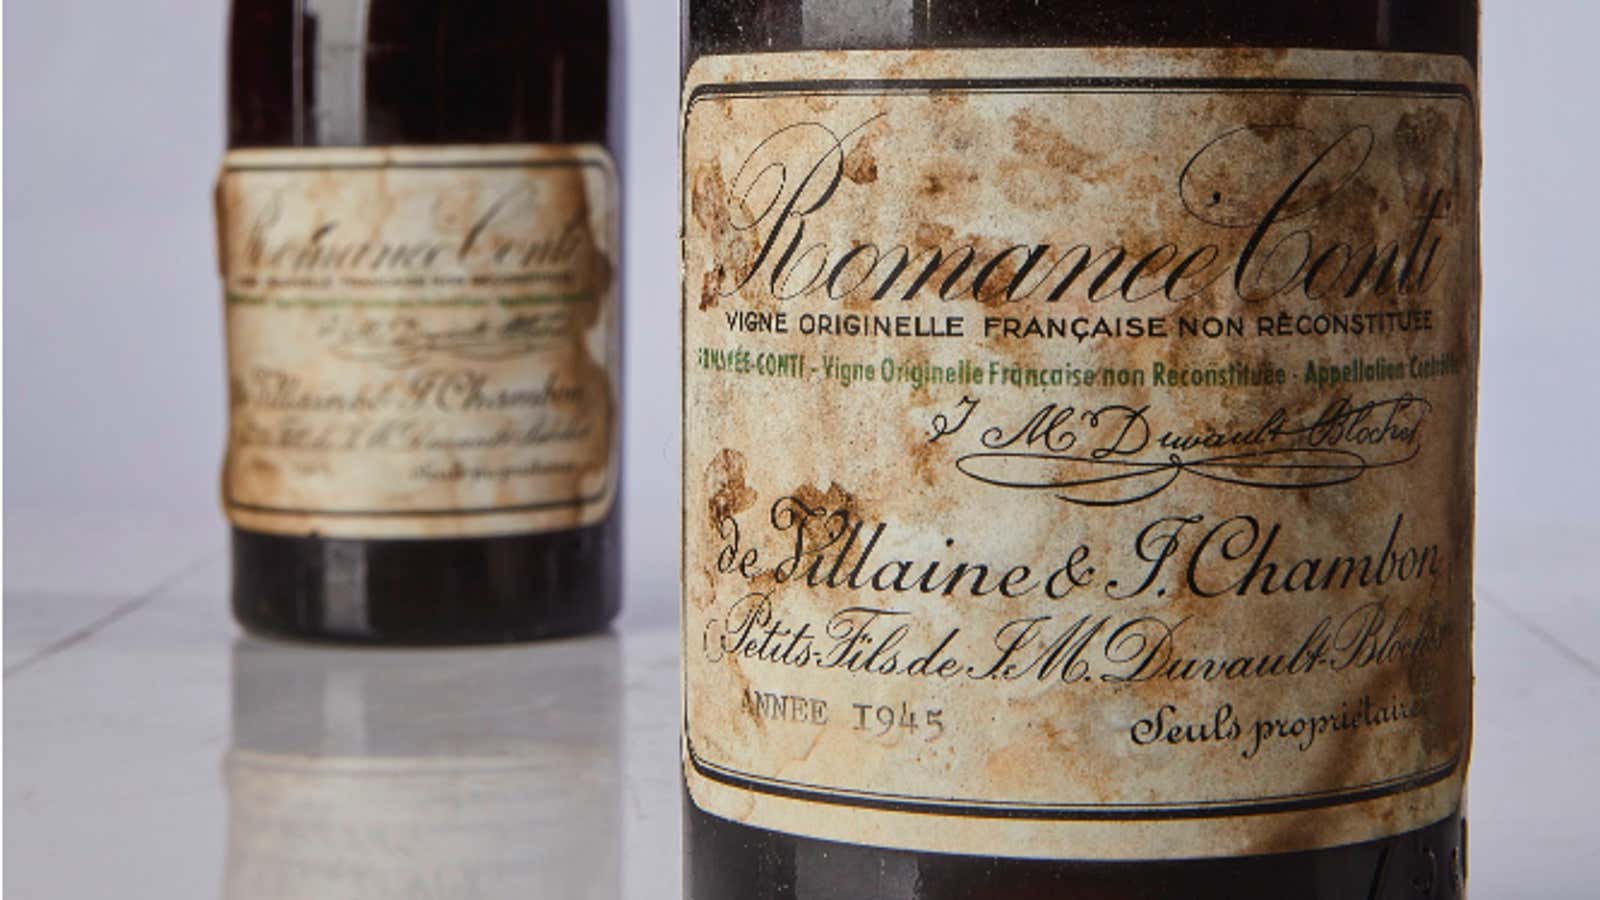 The 1945 Romanee-Conti is the most expensive bottle of wine ever, at $558,000.